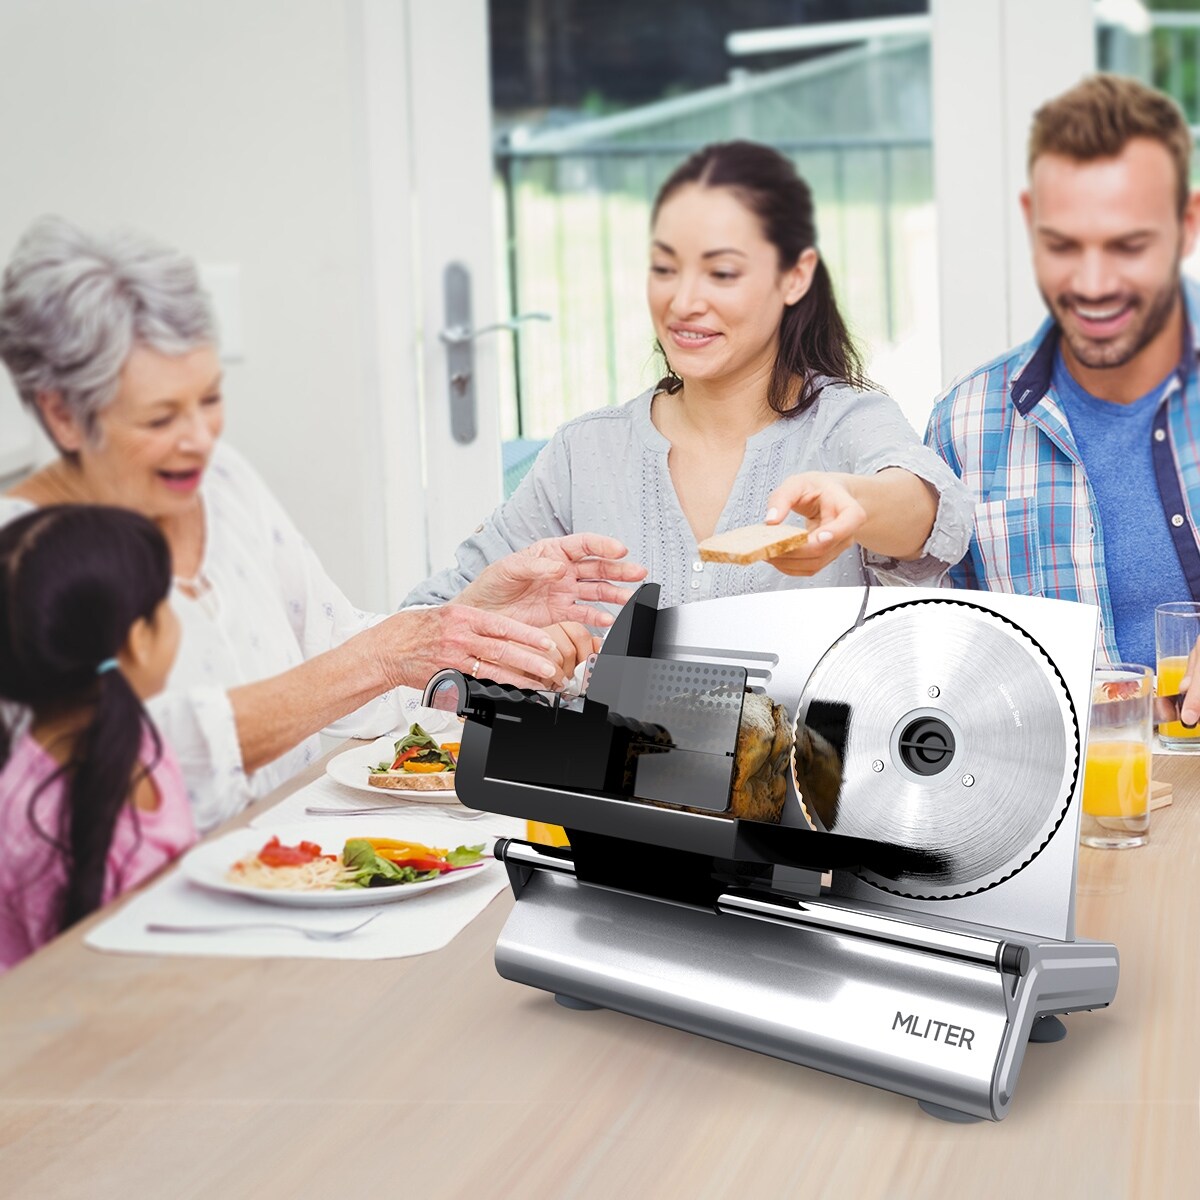 https://ak1.ostkcdn.com/images/products/is/images/direct/333560a963b39bd064c085245dce9472f5ac3b0f/MLITER-Electric-Food-Slicer-150W-Motor-7.5-Inch-Blades-Heavy-Duty-Casting-Aluminium-Case-2-Blades-Available-Thickness-Adjustable.jpg